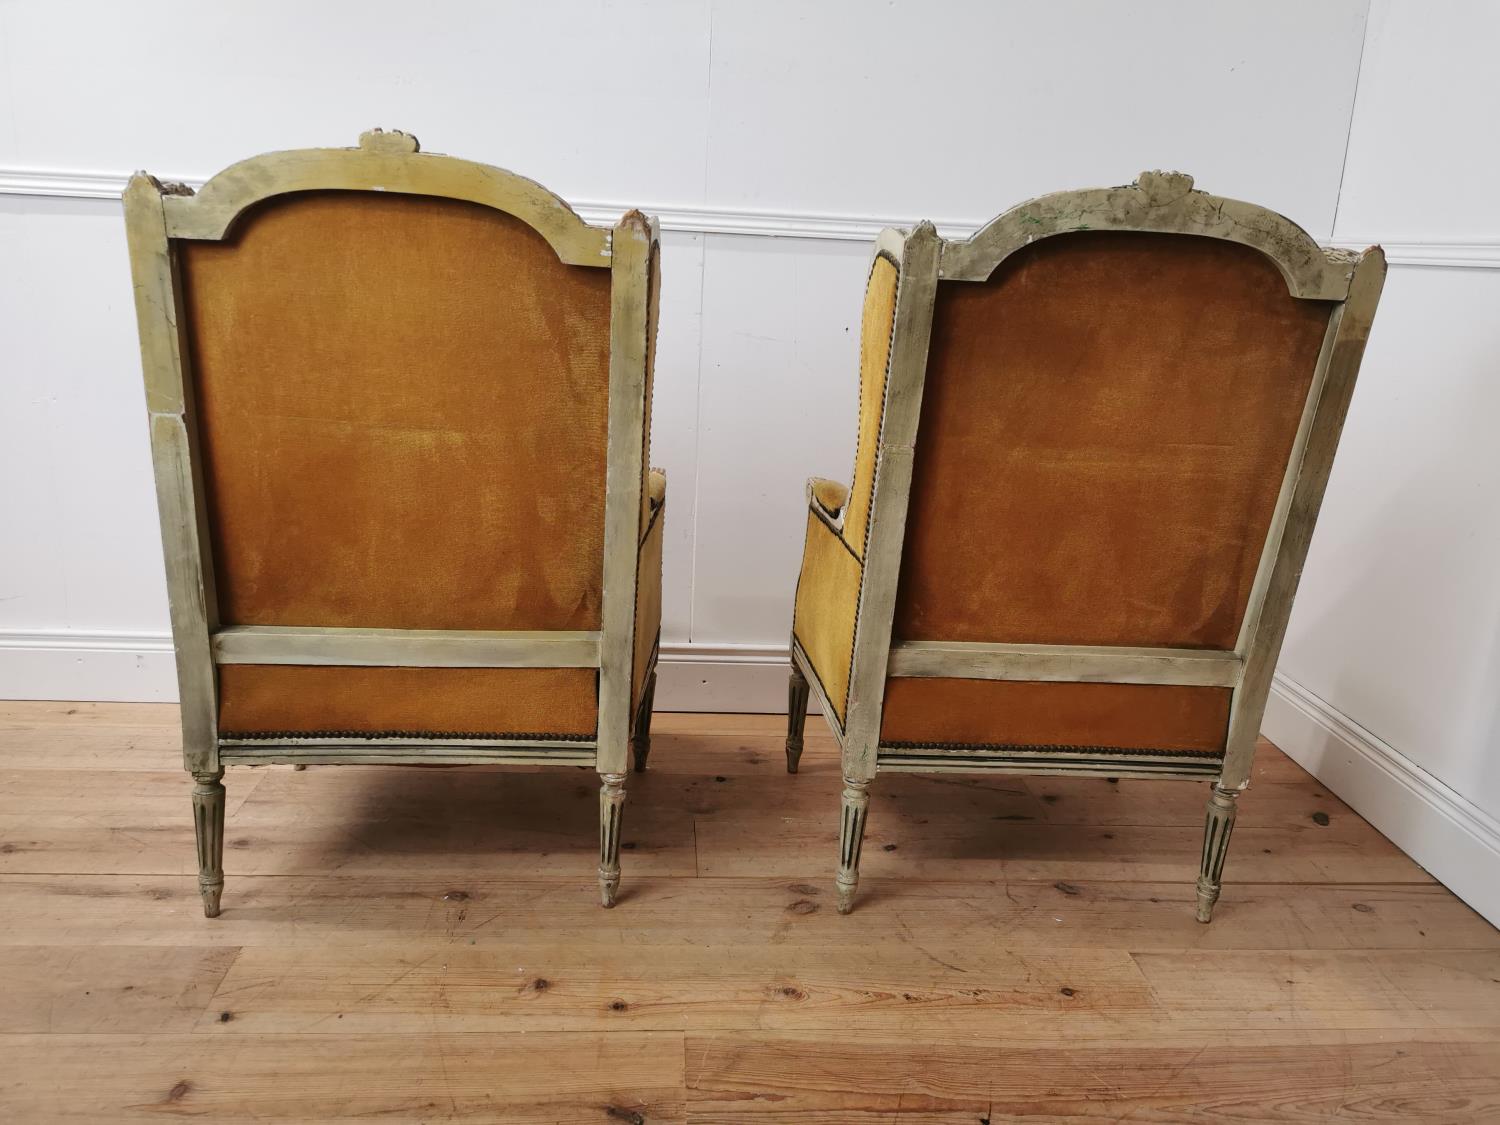 Pair of 19th C. French painted pine velvet upholstered Wingback Armchairs {105cm H x 65cm W x 61 D} - Image 5 of 5